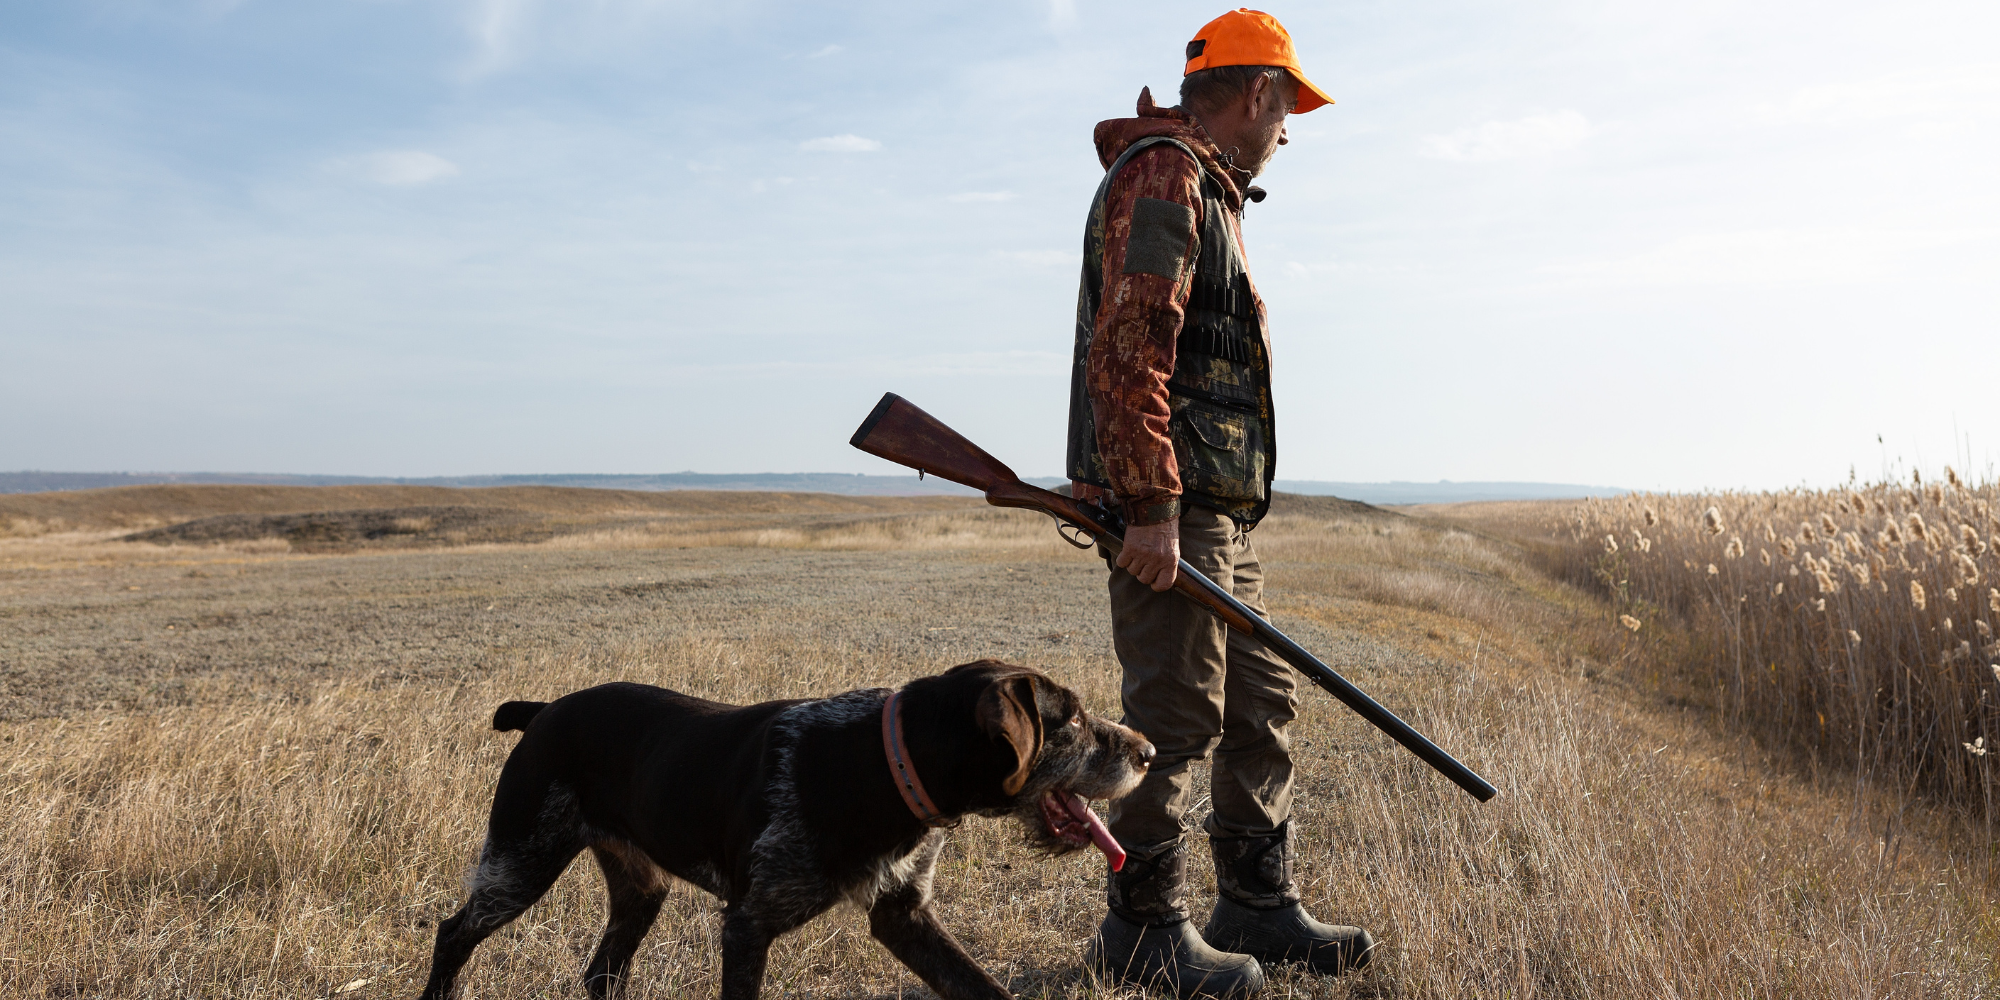 A man wearing a camouflage jacket stands in a field holding a gun, accompanied by his hunting dog.